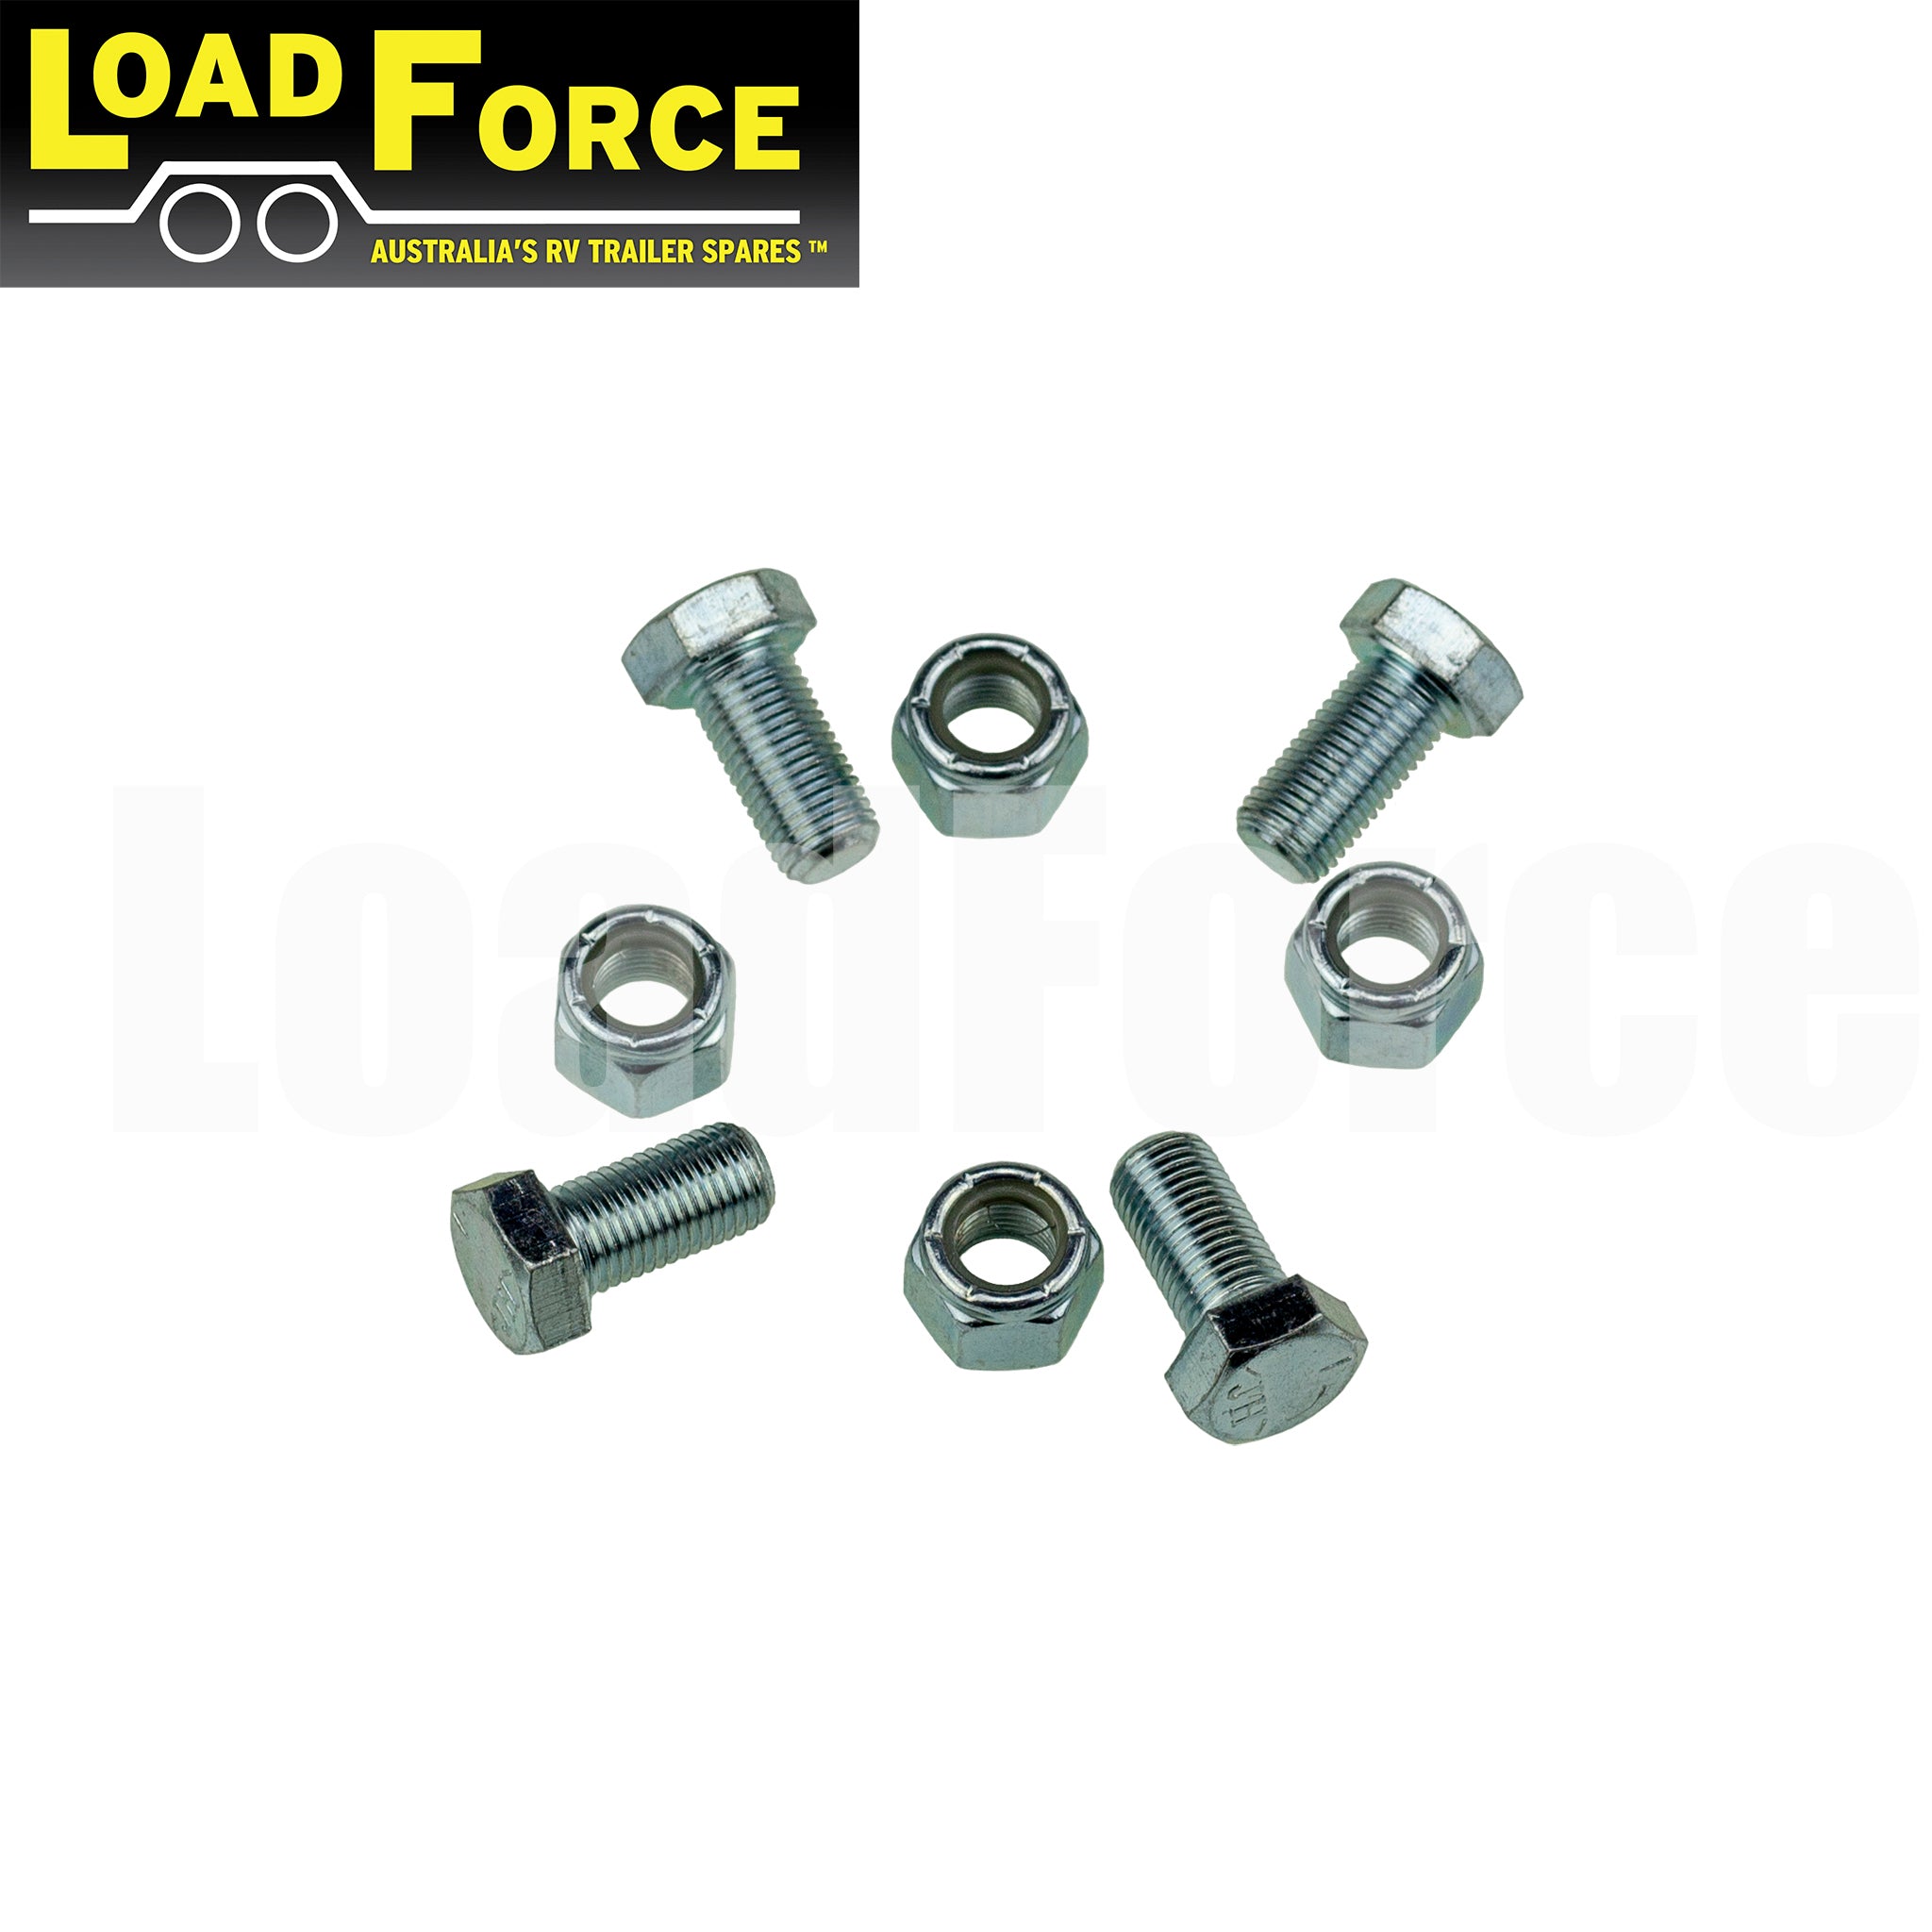 Bolt kit for hydraulic backing plate